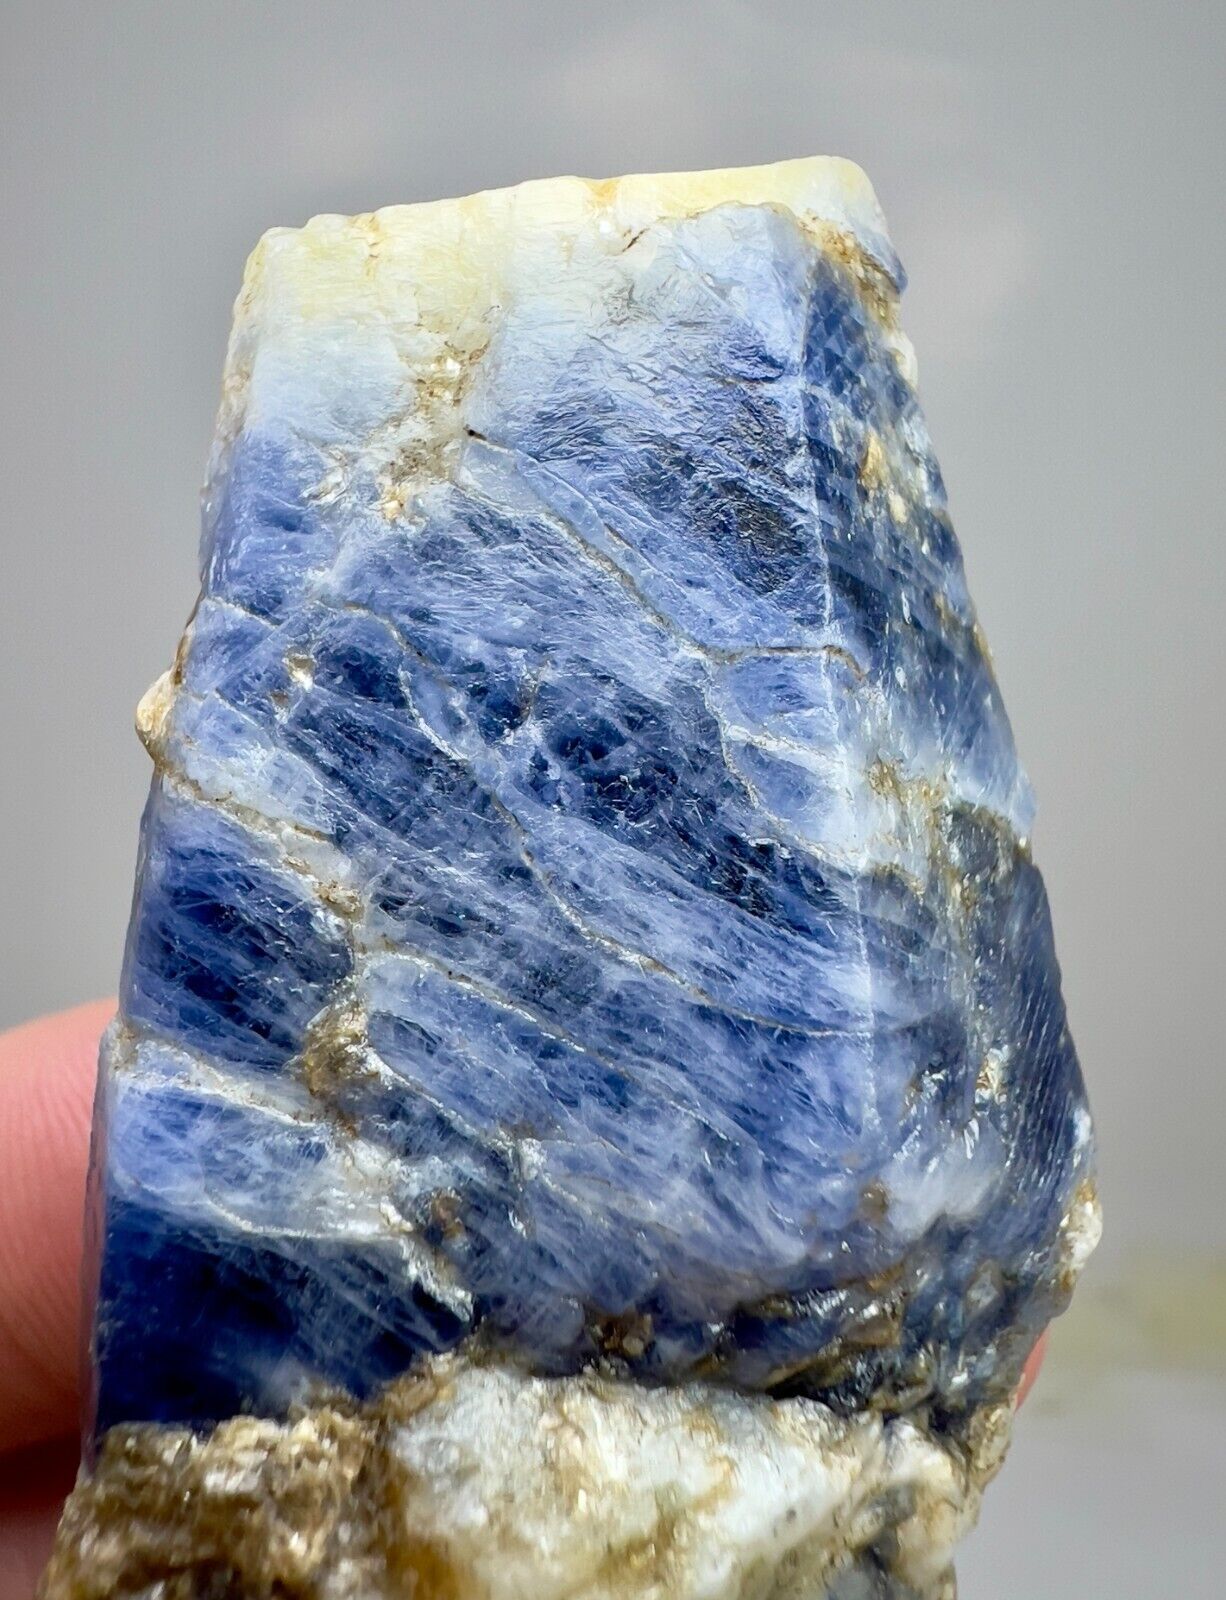 97 GM Rare Excellent Double Terminated Huge Sapphire Crystal From Badakhshan AFG